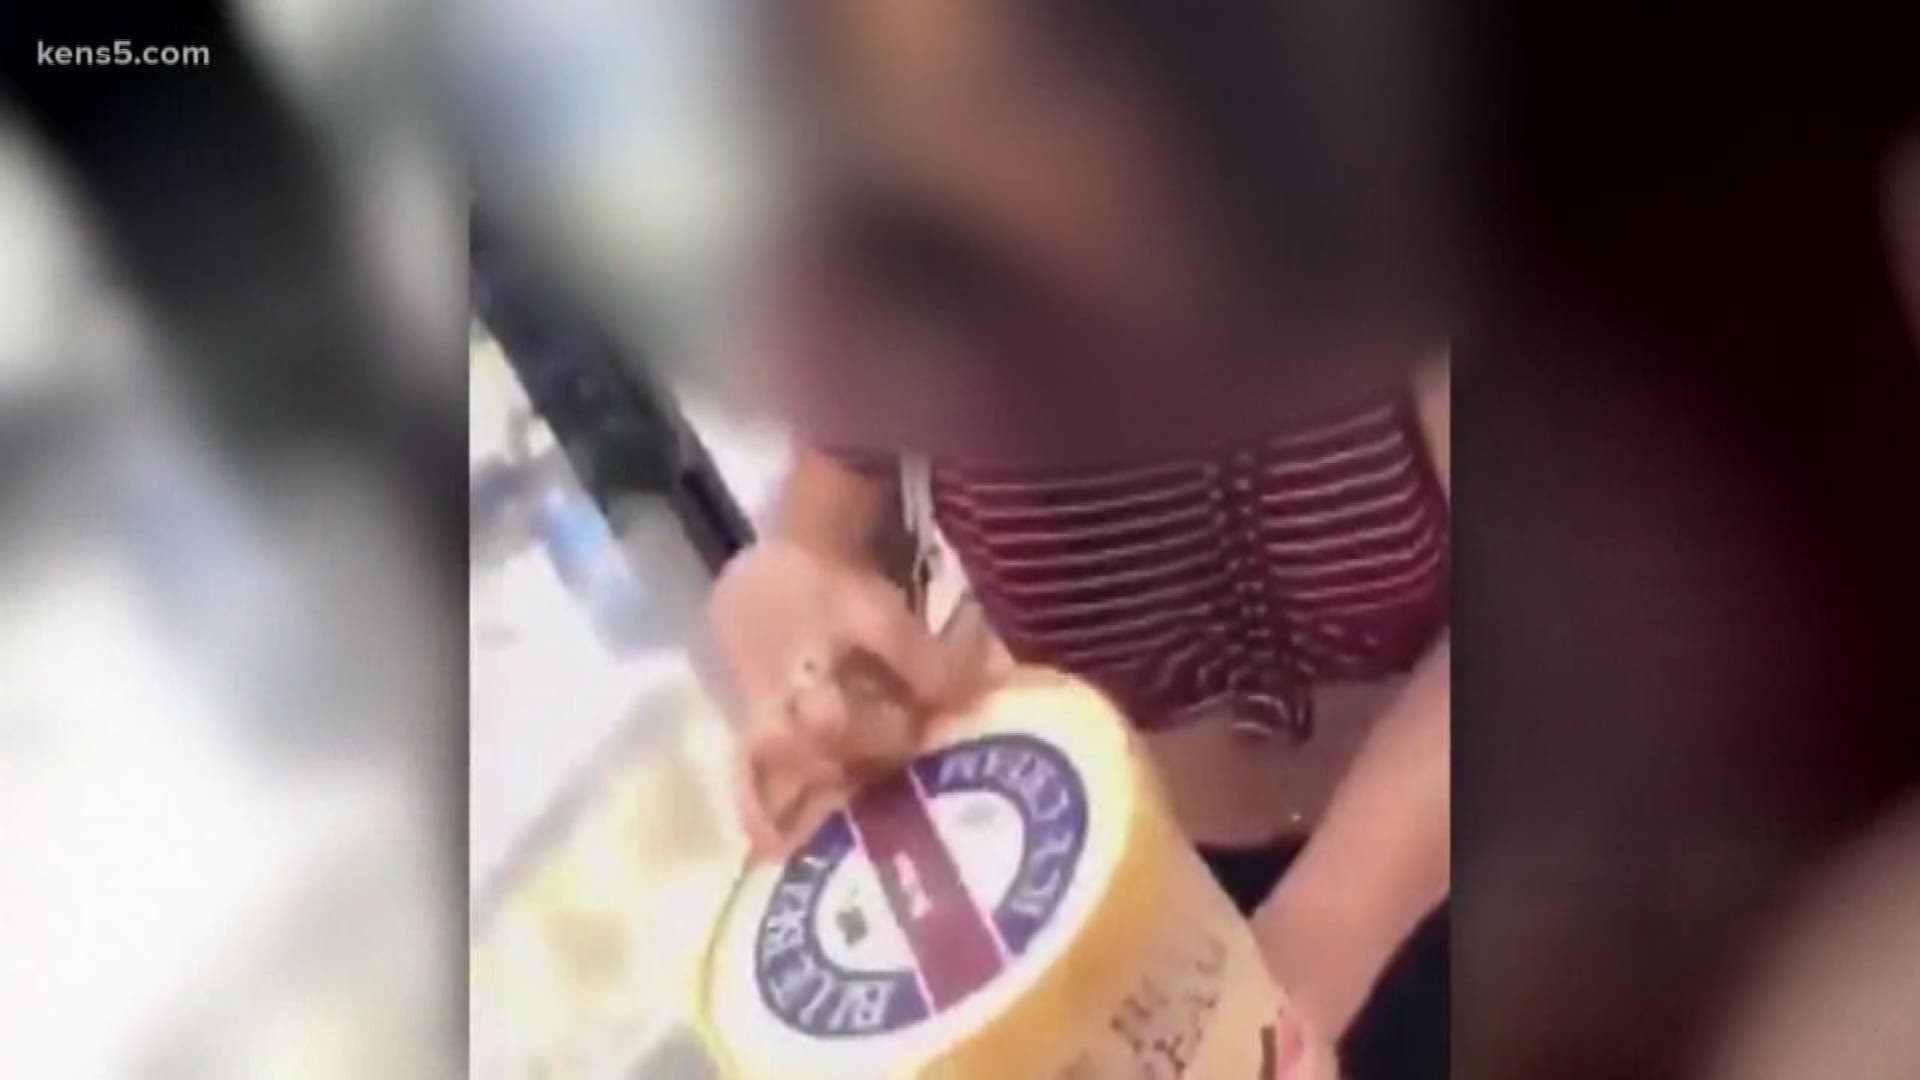 The person accused of tampering with a half-gallon of Blue Bell ice cream has been identified.